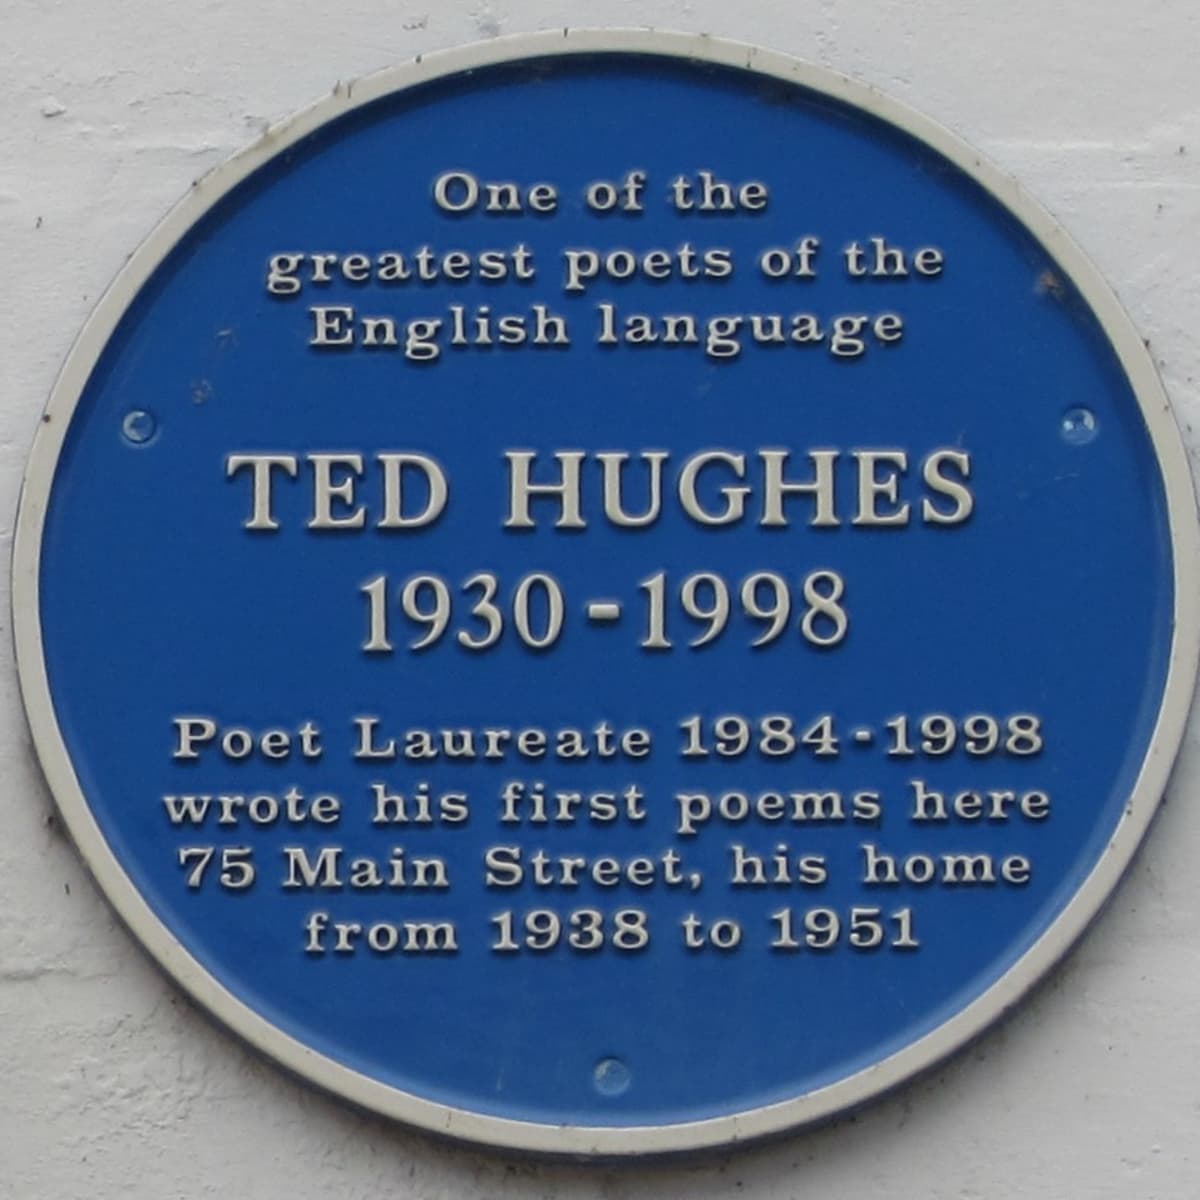 Analysis of the Poem 'Hawk Roosting' by Ted Hughes - Owlcation